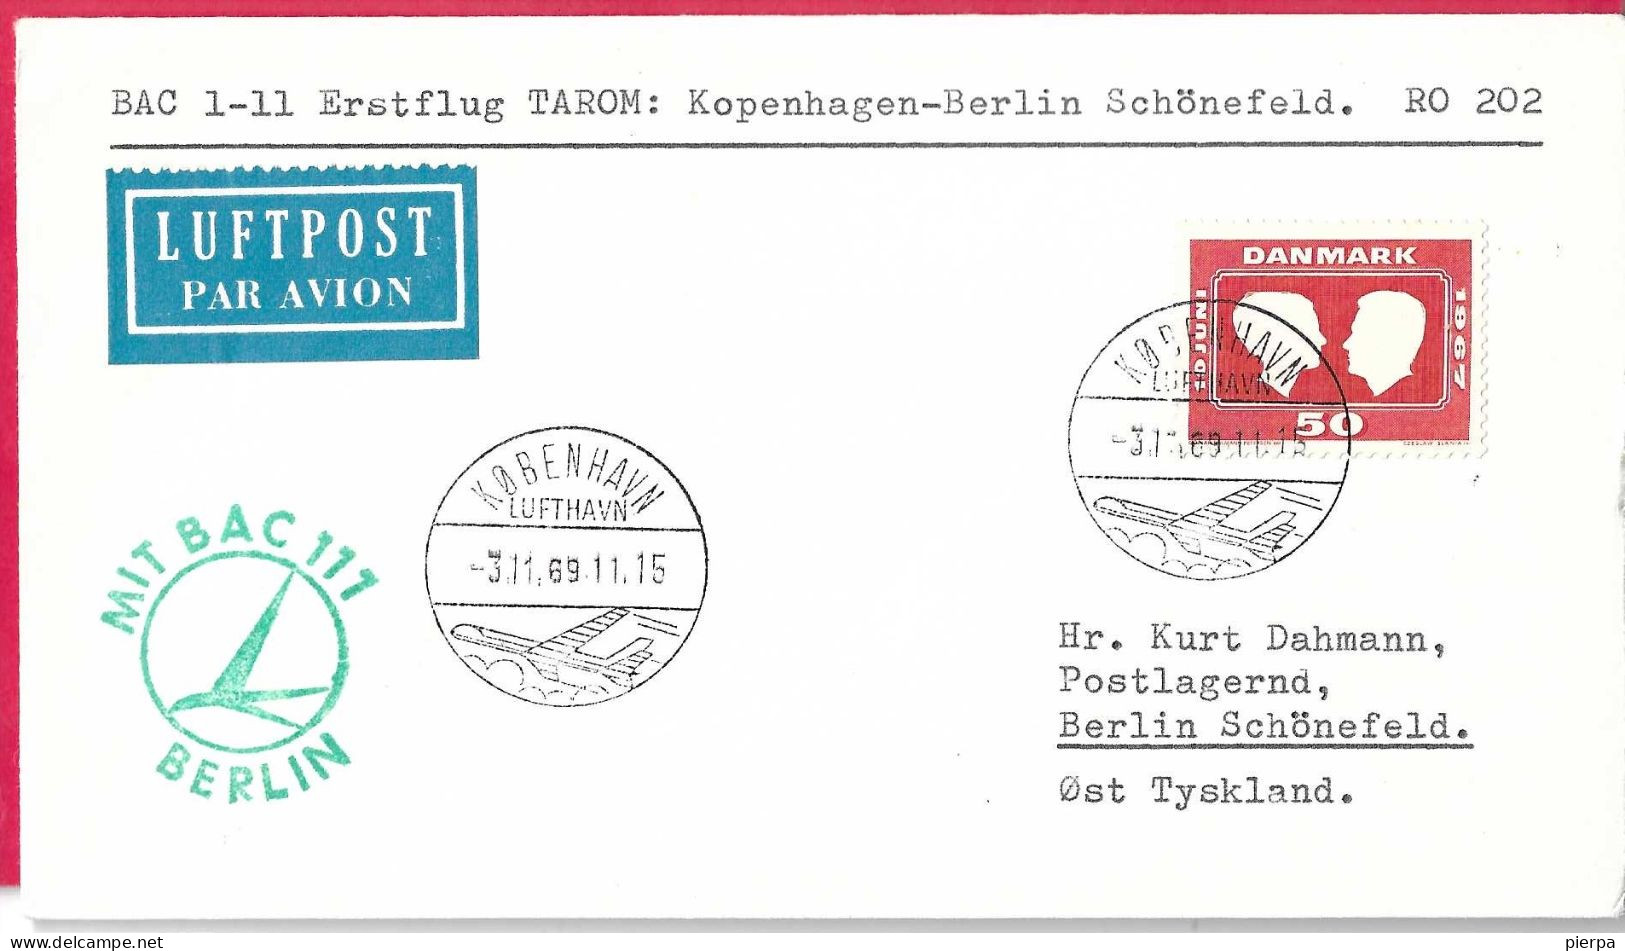 DANMARK - FIRST FLIGHT TAROM WITH BAC 117 FROM KOBENHAVN TO BERLIN/SCHONEFELD *3.11.69* ON OFFICIAL COVER - Poste Aérienne